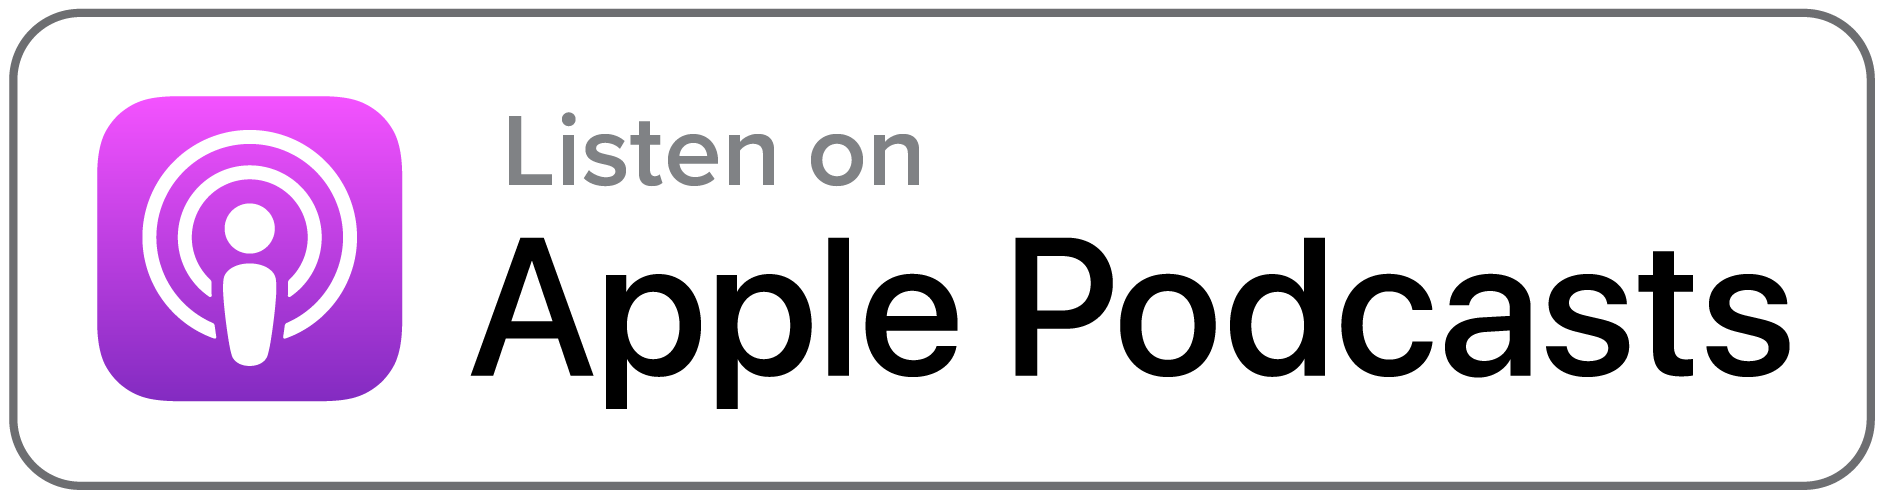 Follow to listen to our podcasts on Apple